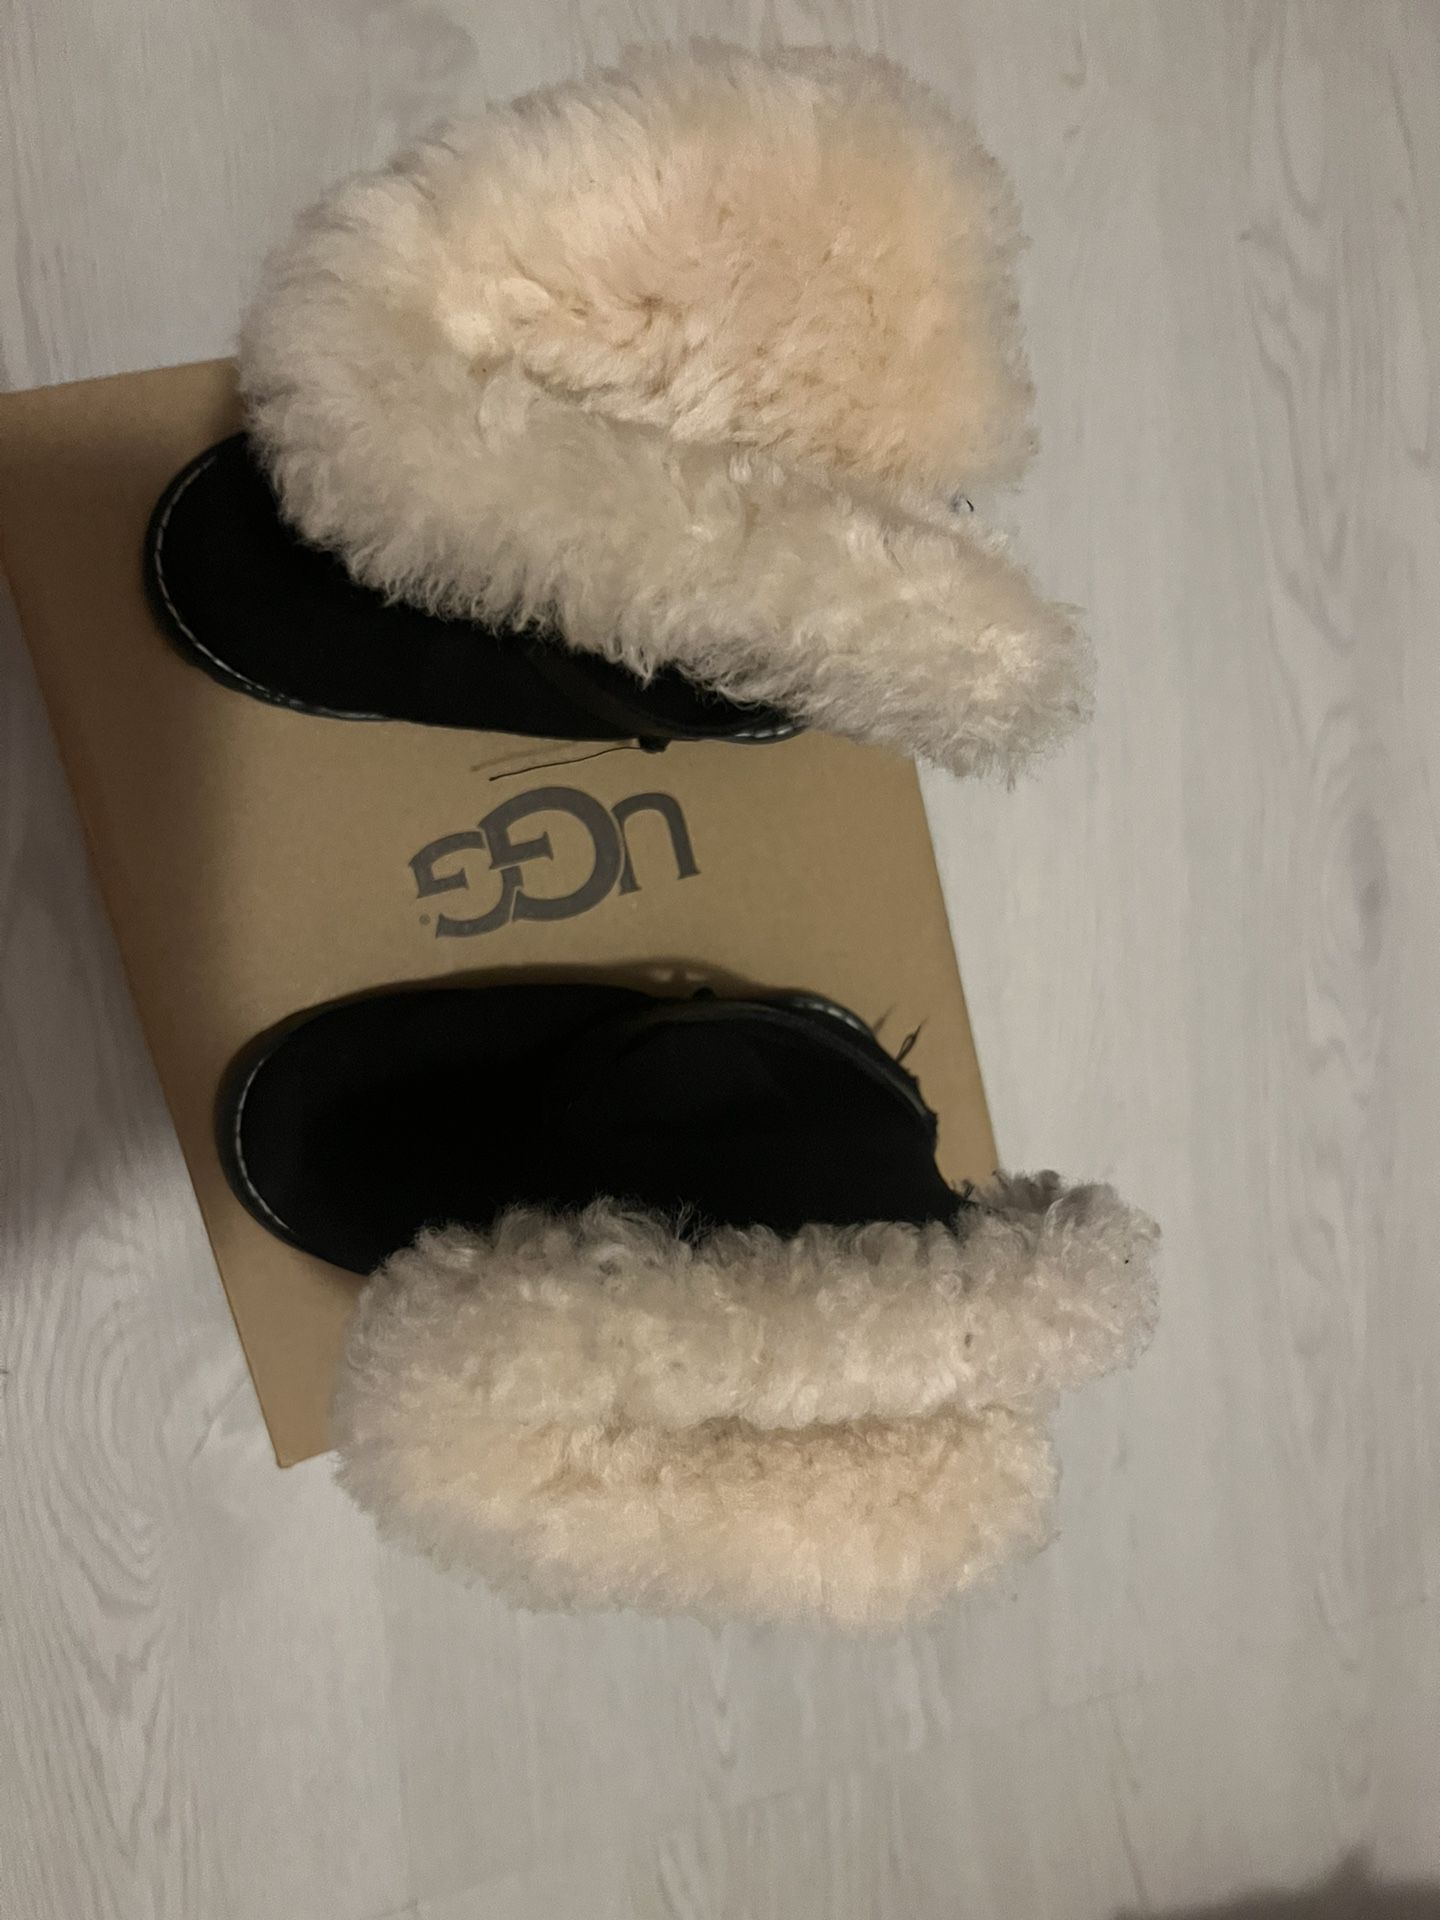 Ugg Toddler Boots, Size 9